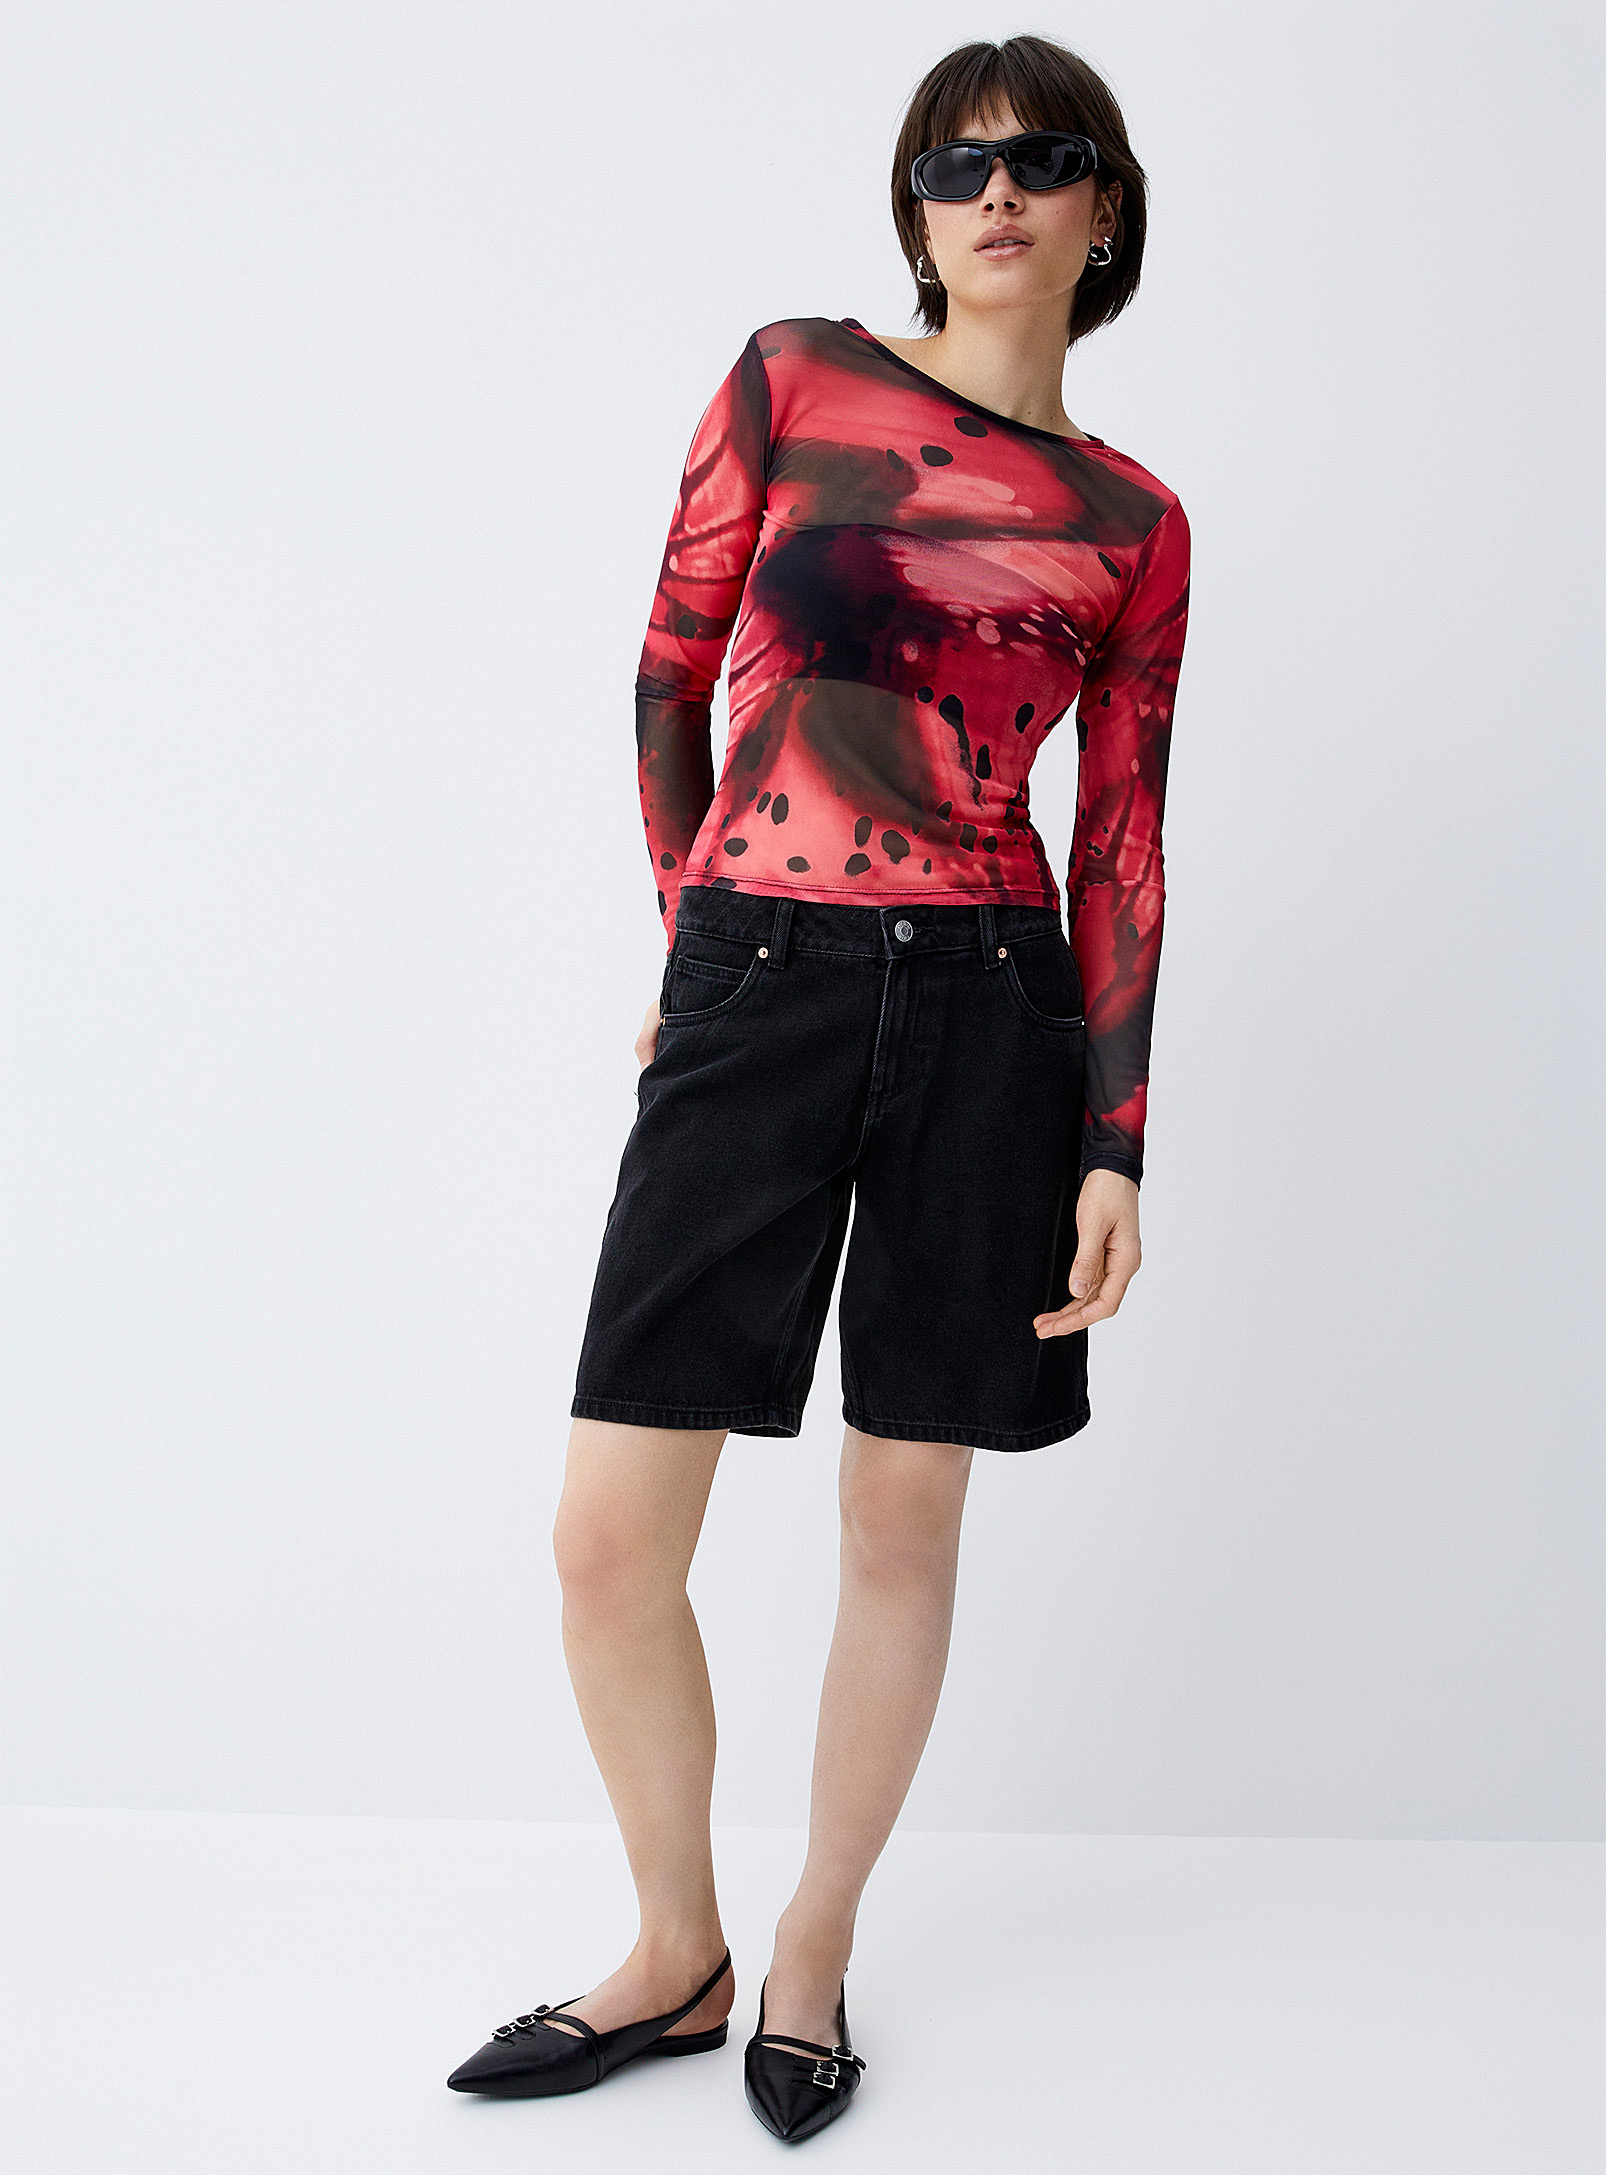 Twik Printed Mesh T-shirt In Patterned Red